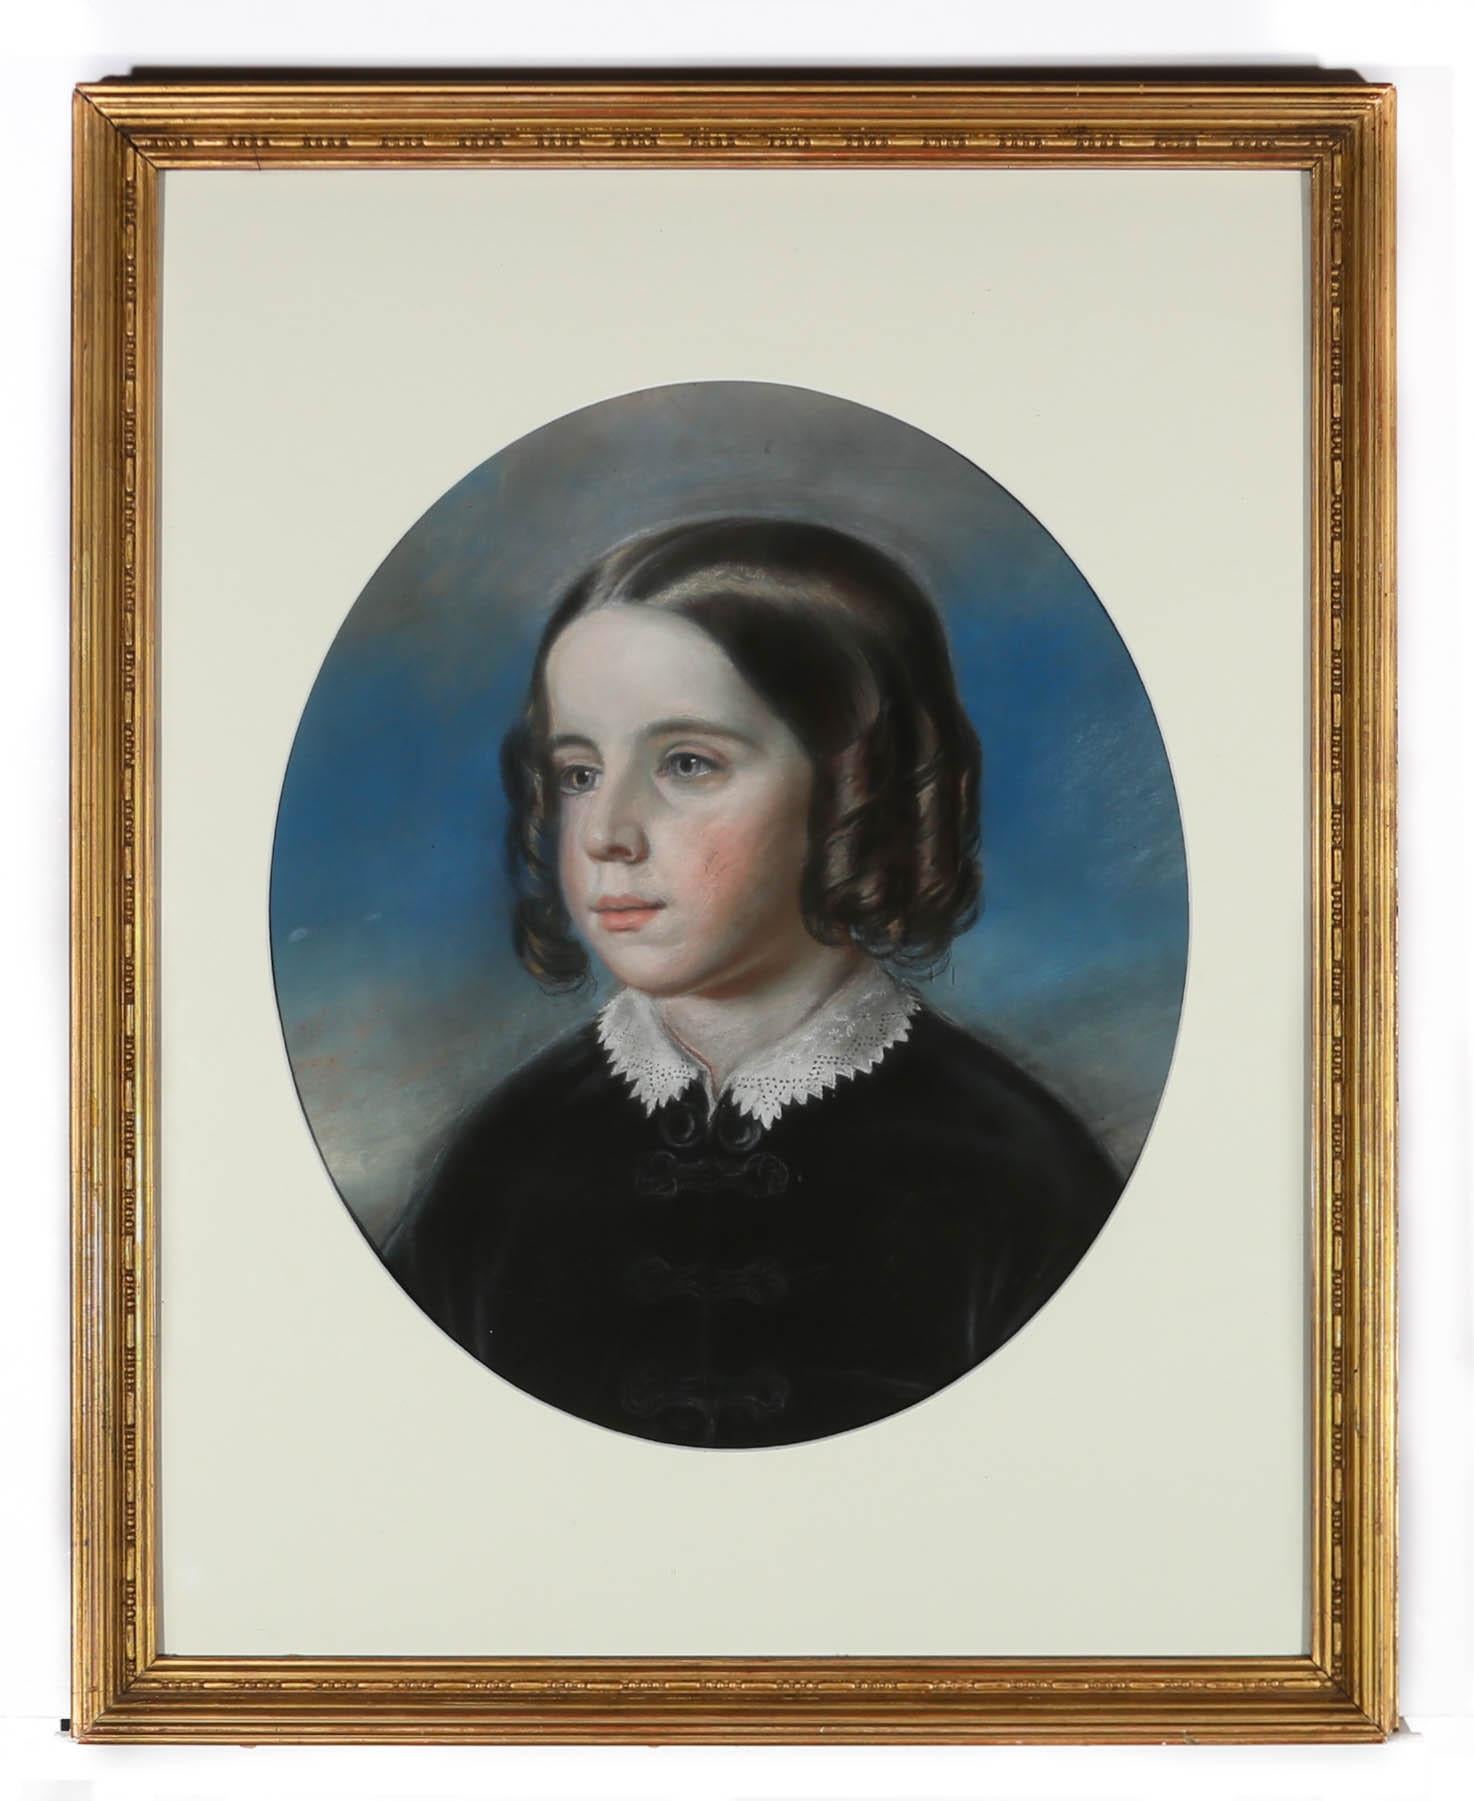 This fine Victorian portrait depicts a rosy cheeked and red lipped girl, sat wearing a black buttoned down frock with delicate lace collar. The artist has managed to capture the sitter's elegant ragged curls, shimmering on either side of her perfect